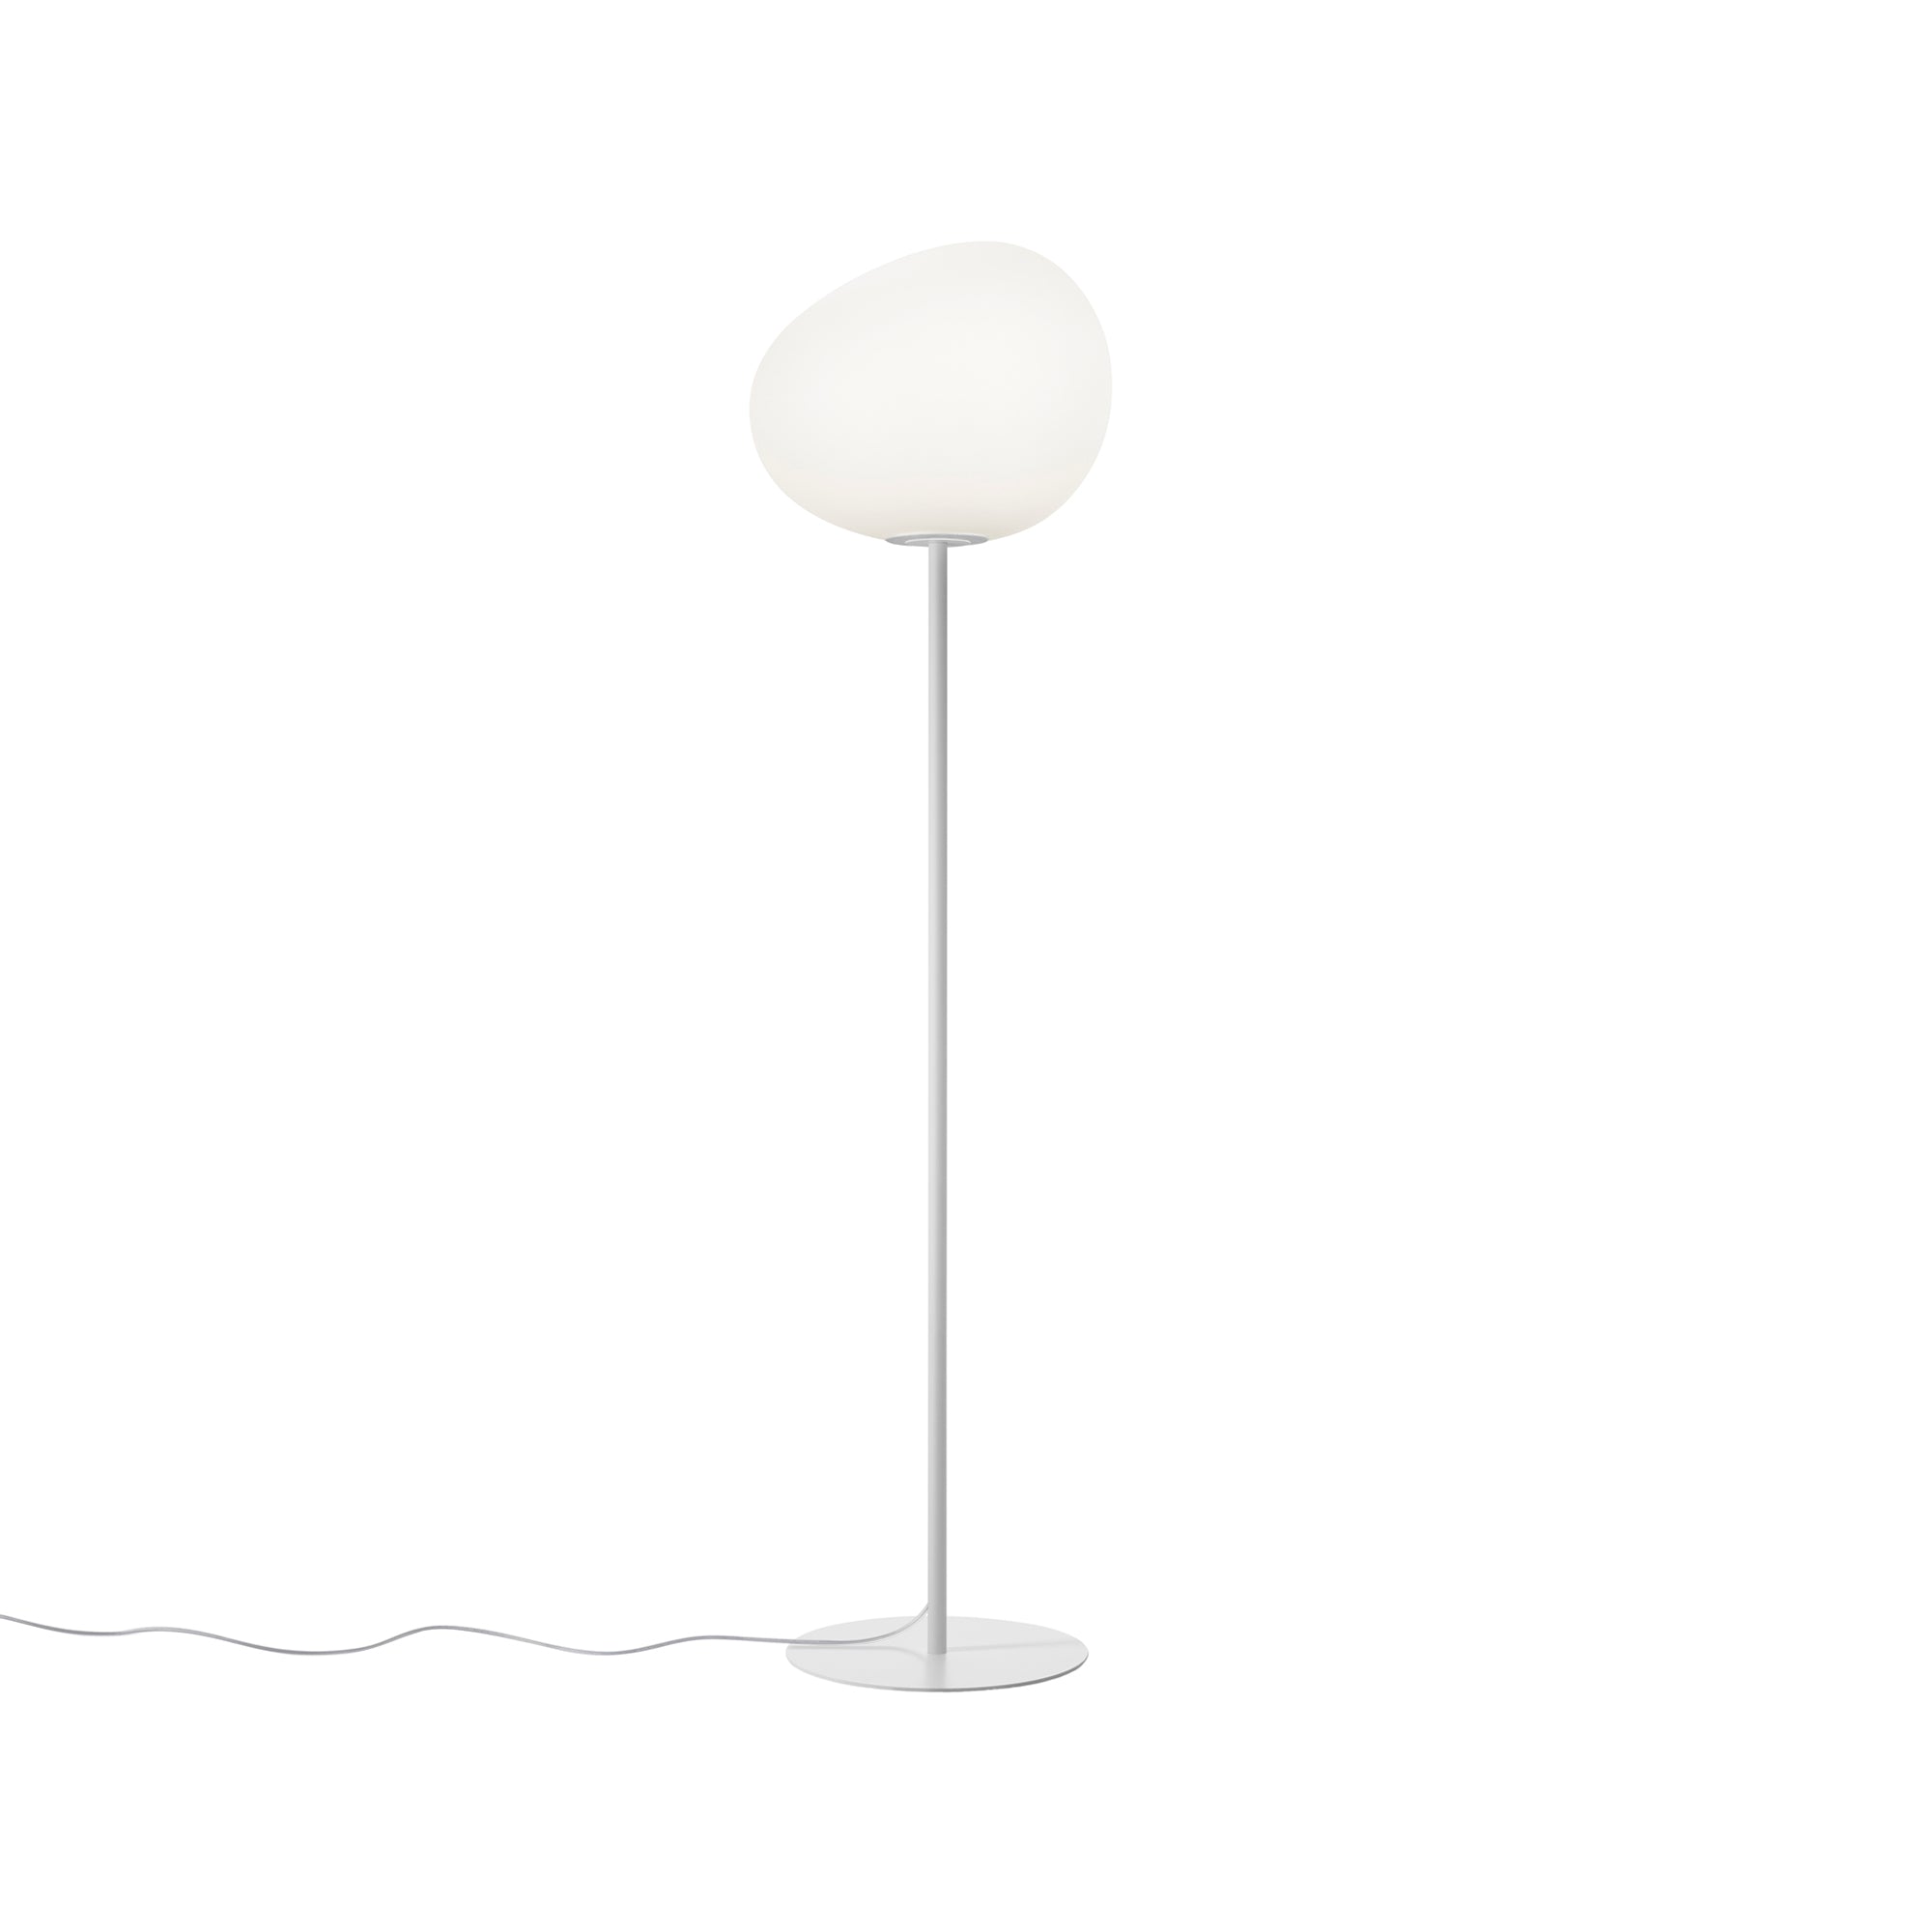 Gregg Table and Floor Lamp